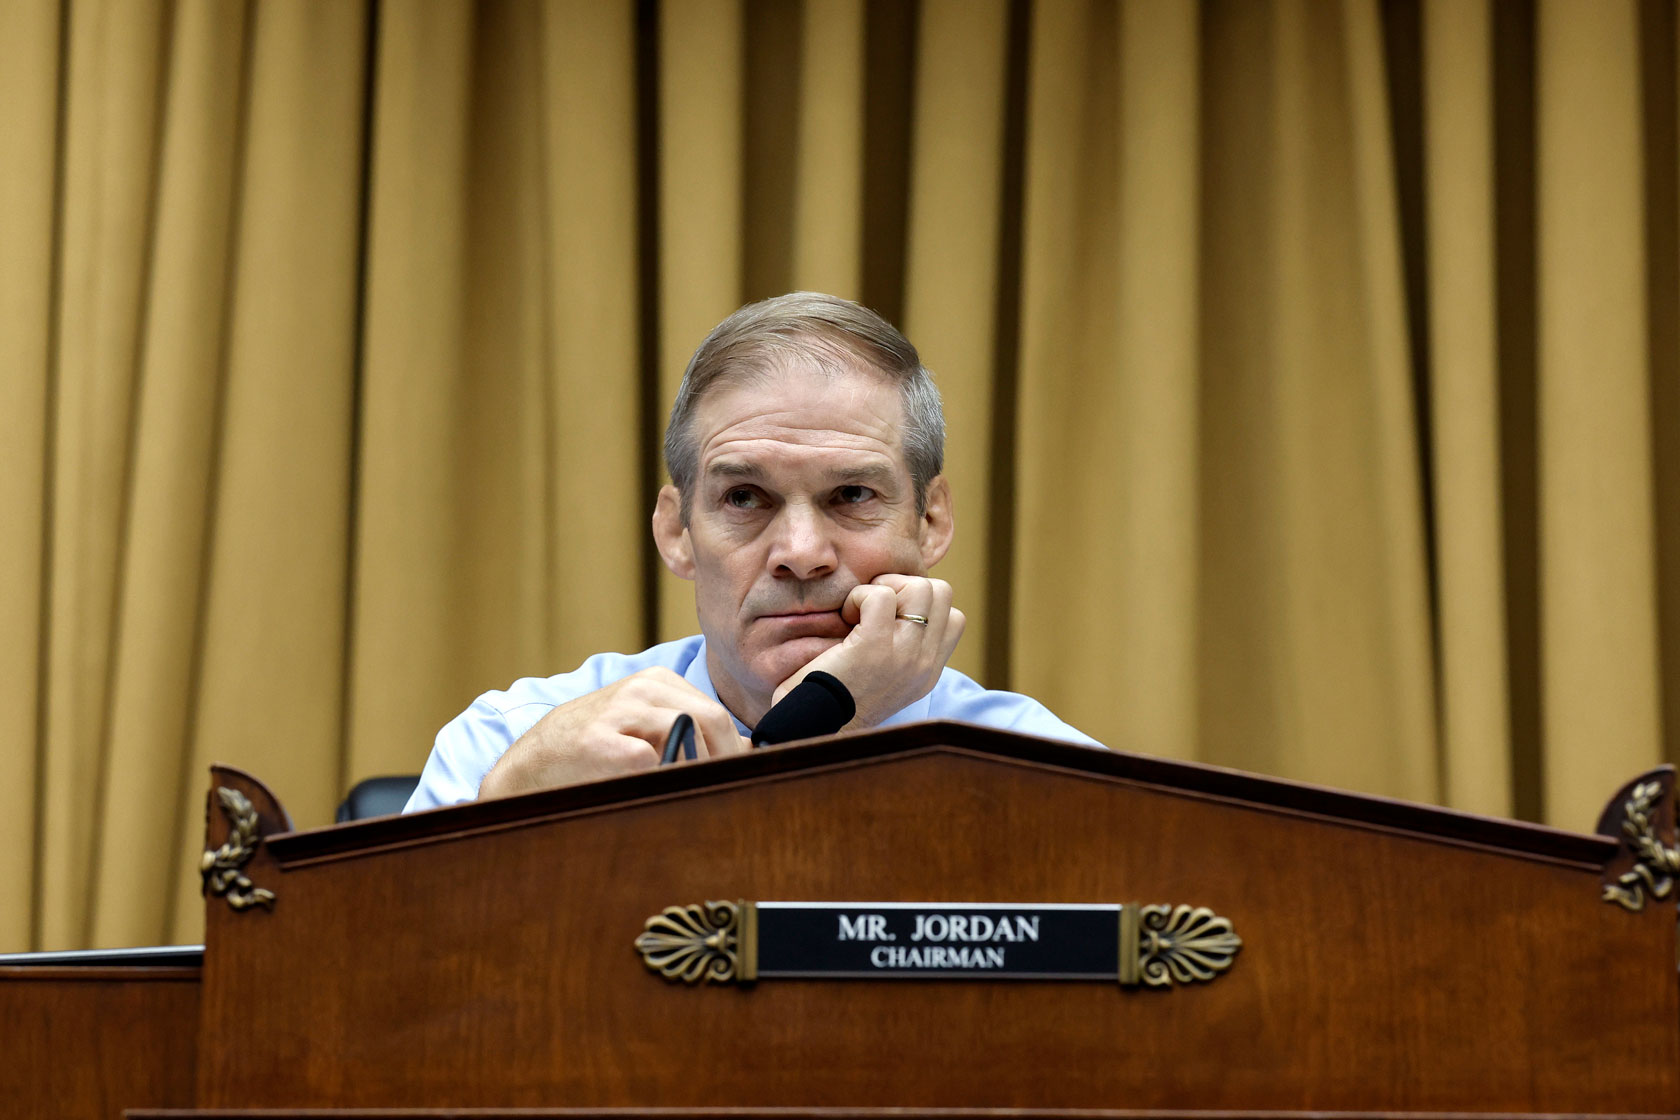 Rep. Jim Jordan is seen staring intently from behind a podium with one hand propping up his face.